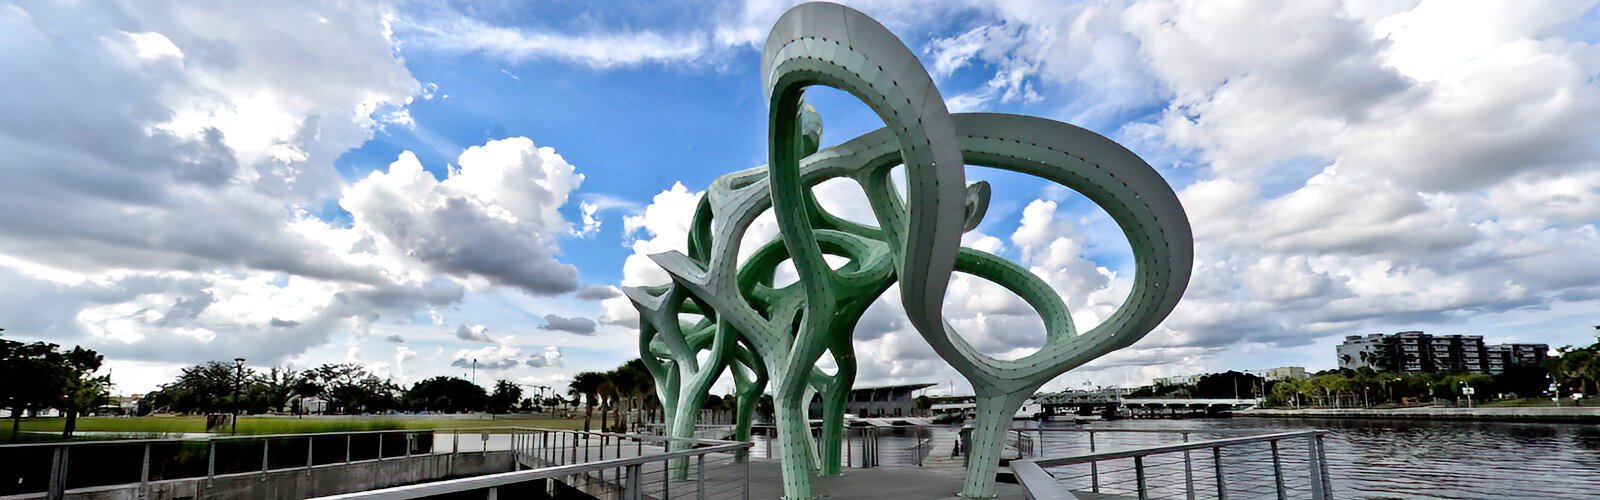 A key feature of Julian B. Lane Riverfront Park is the “Form of Wander” sculpture by artist Marc Fornes, an abstract tree canopy commissioned by Hillsborough County that provides a unique spatial experience on the pier as well as shade.